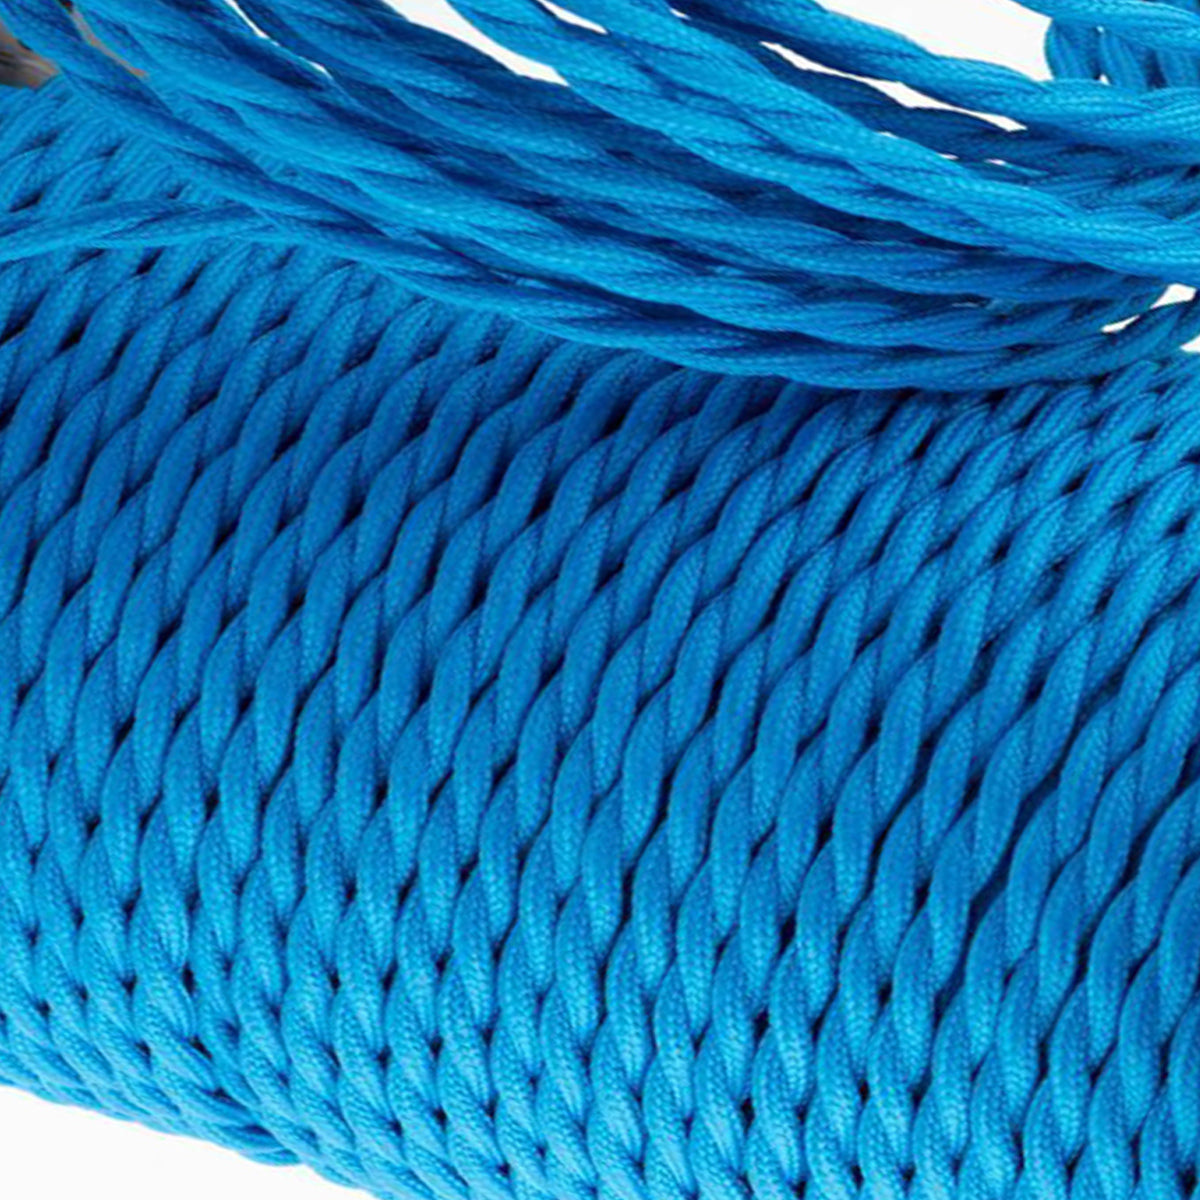 Vintage 5  meter 2 core Twisted Braided Cable, Electrical Fabric Flexible Lamp Cable Wire Cord for UK Light